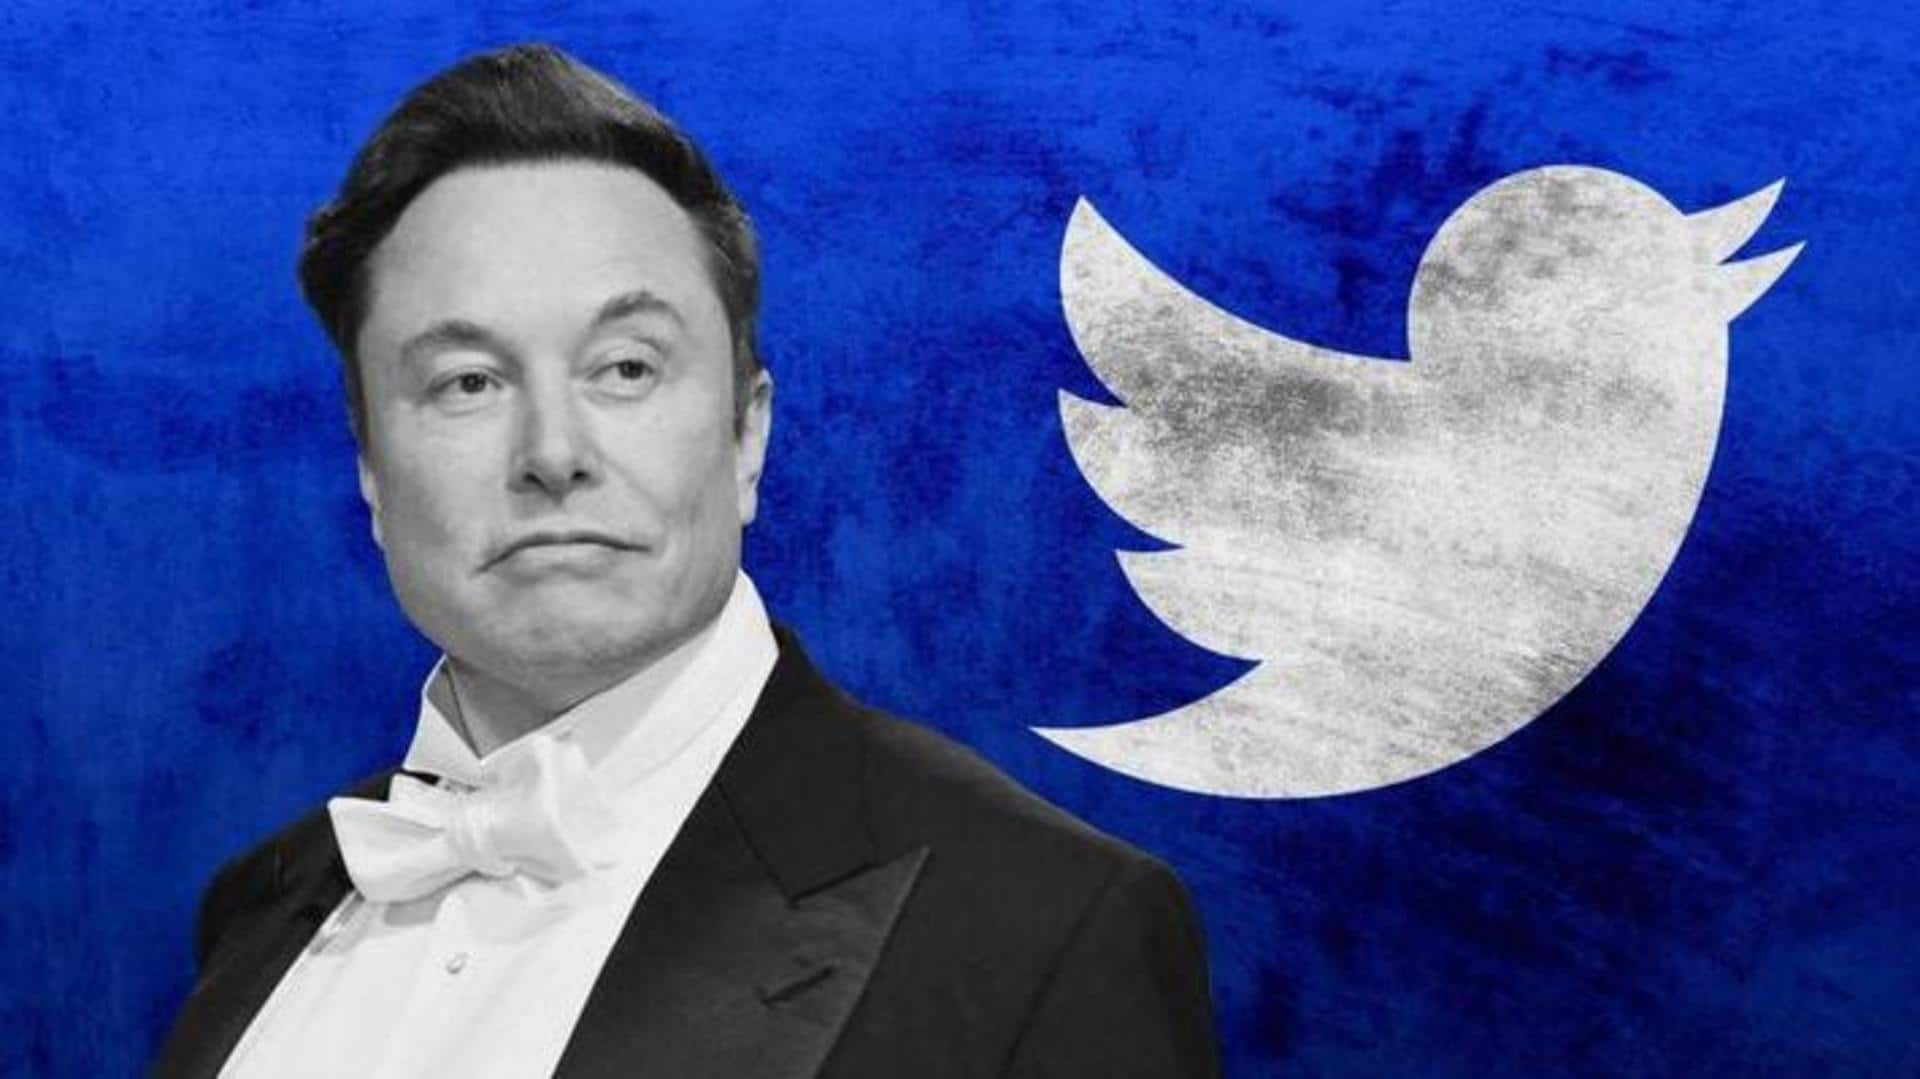 Did Twitter create a system to boost Elon Musk's tweets